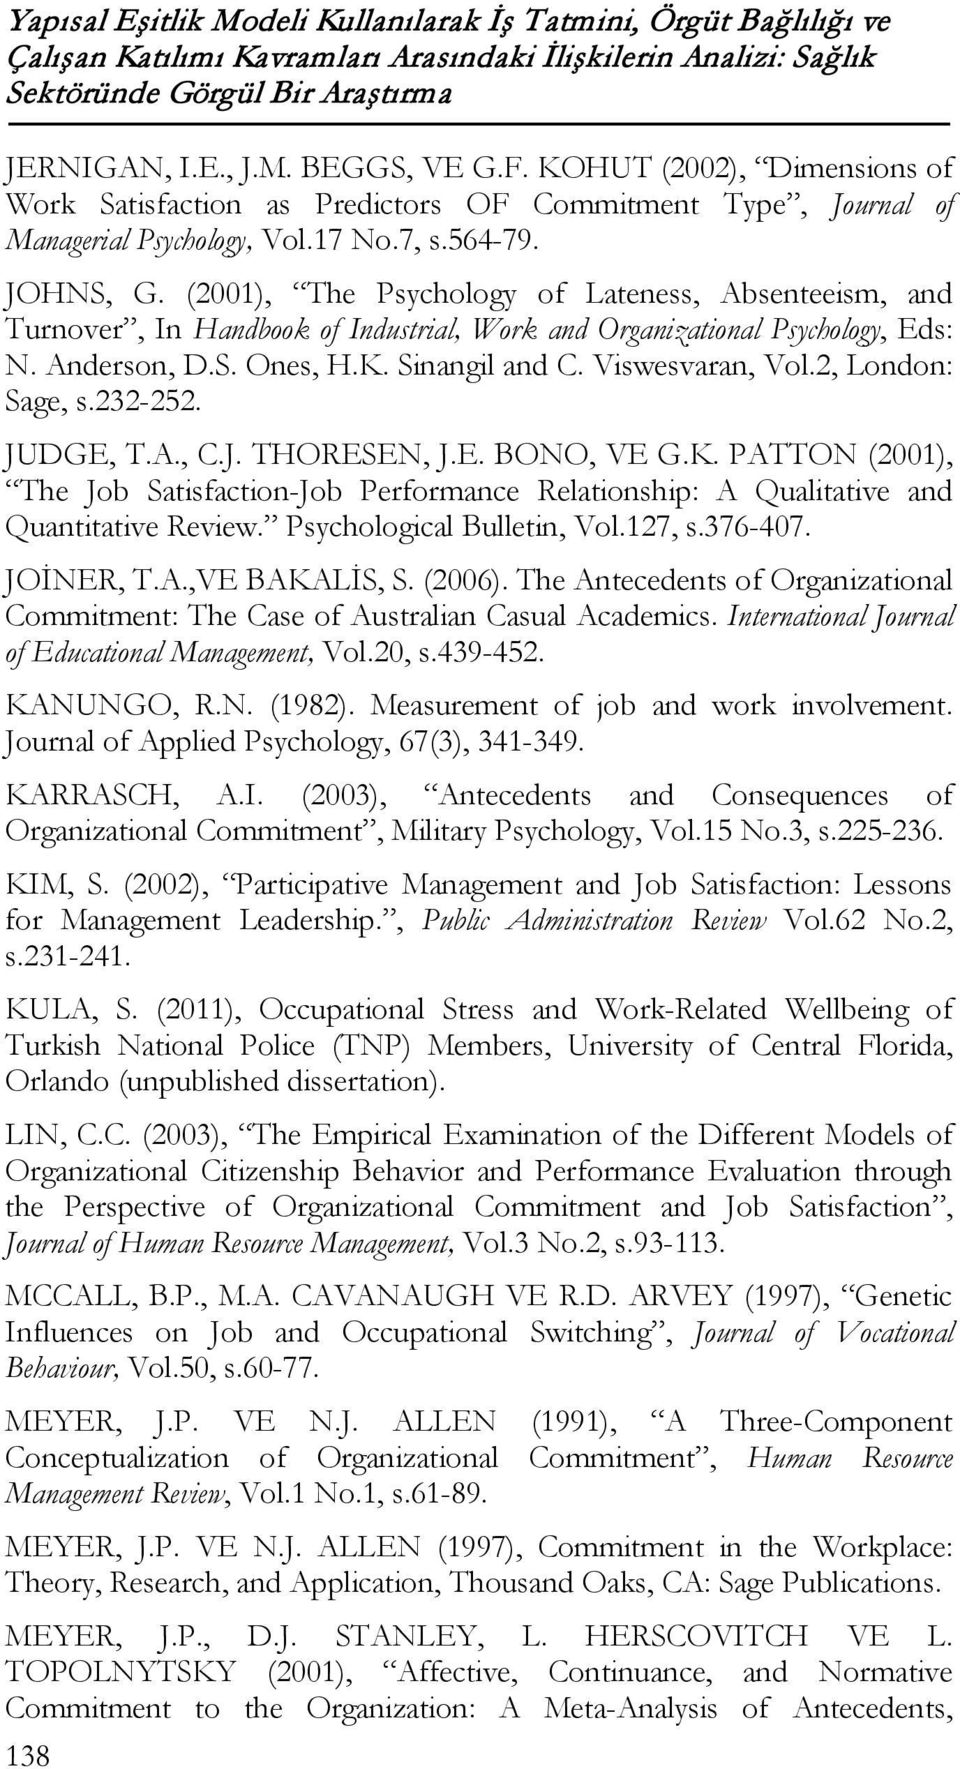 (2001), The Psychology of Lateness, Absenteeism, and Turnover, In Handbook of Industrial, Work and Organizational Psychology, Eds: N. Anderson, D.S. Ones, H.K. Sinangil and C. Viswesvaran, Vol.